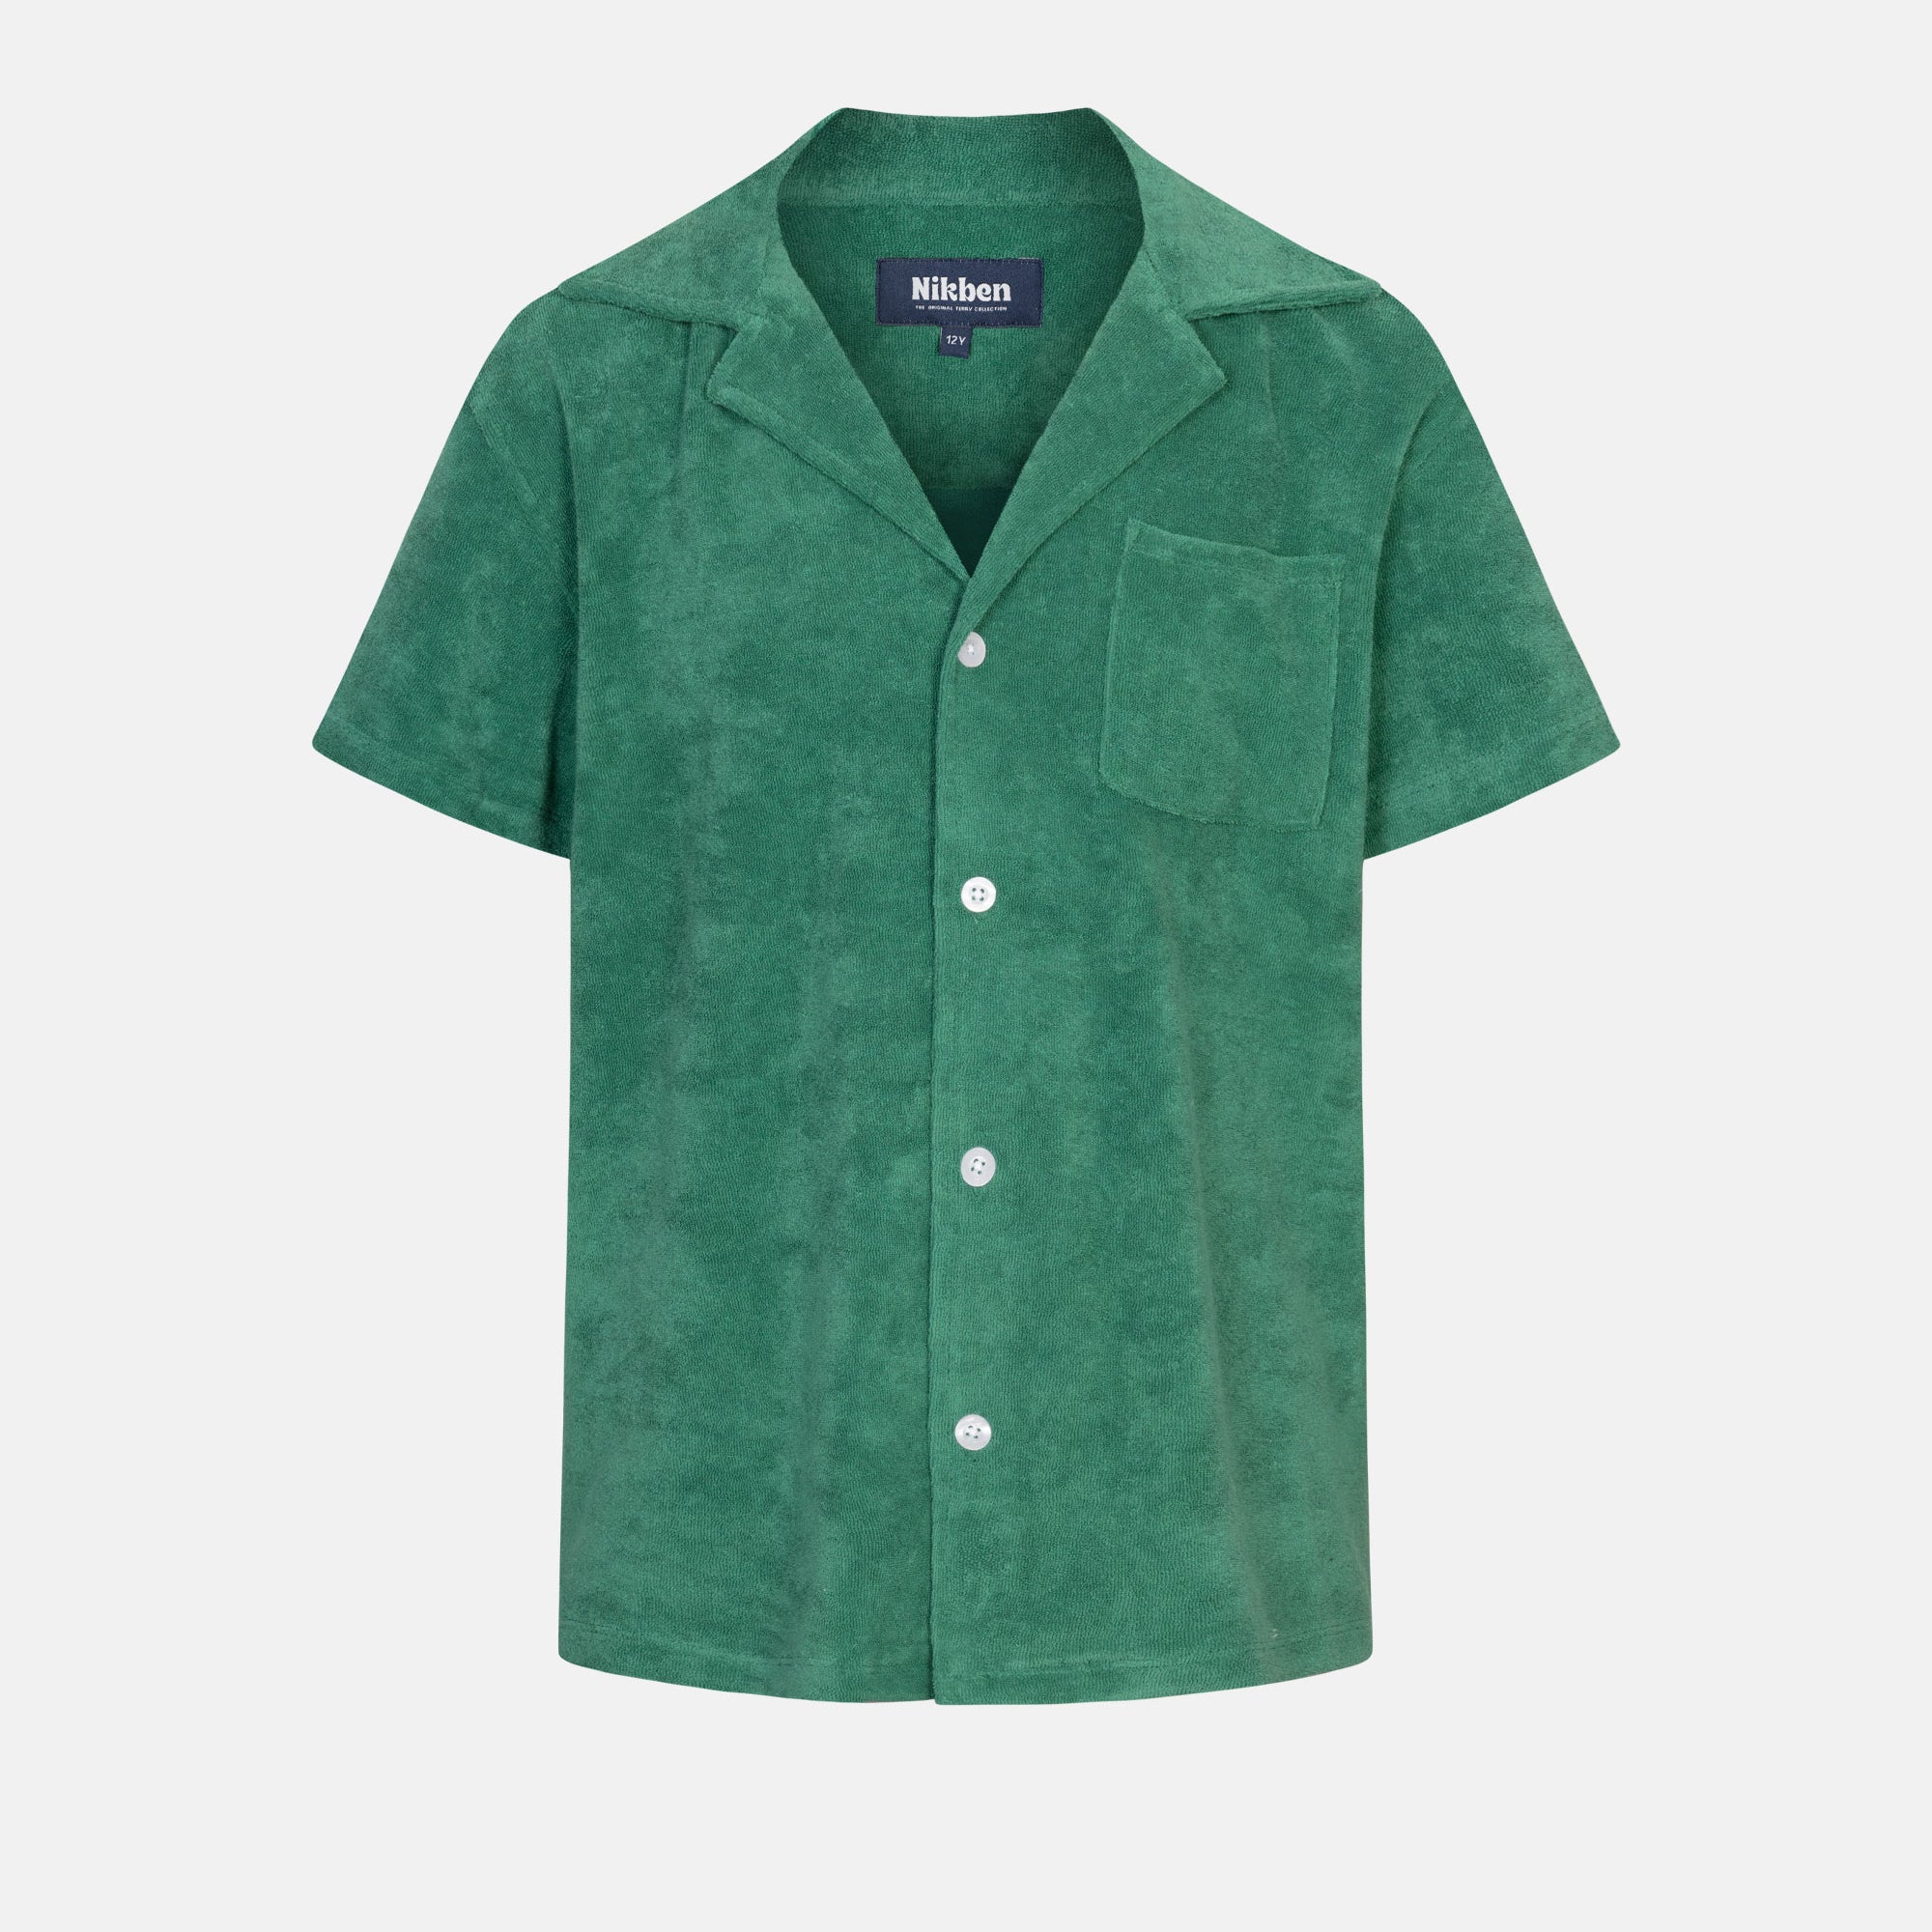 Green short sleeve shirt for kids with white button closure and one chest pocket